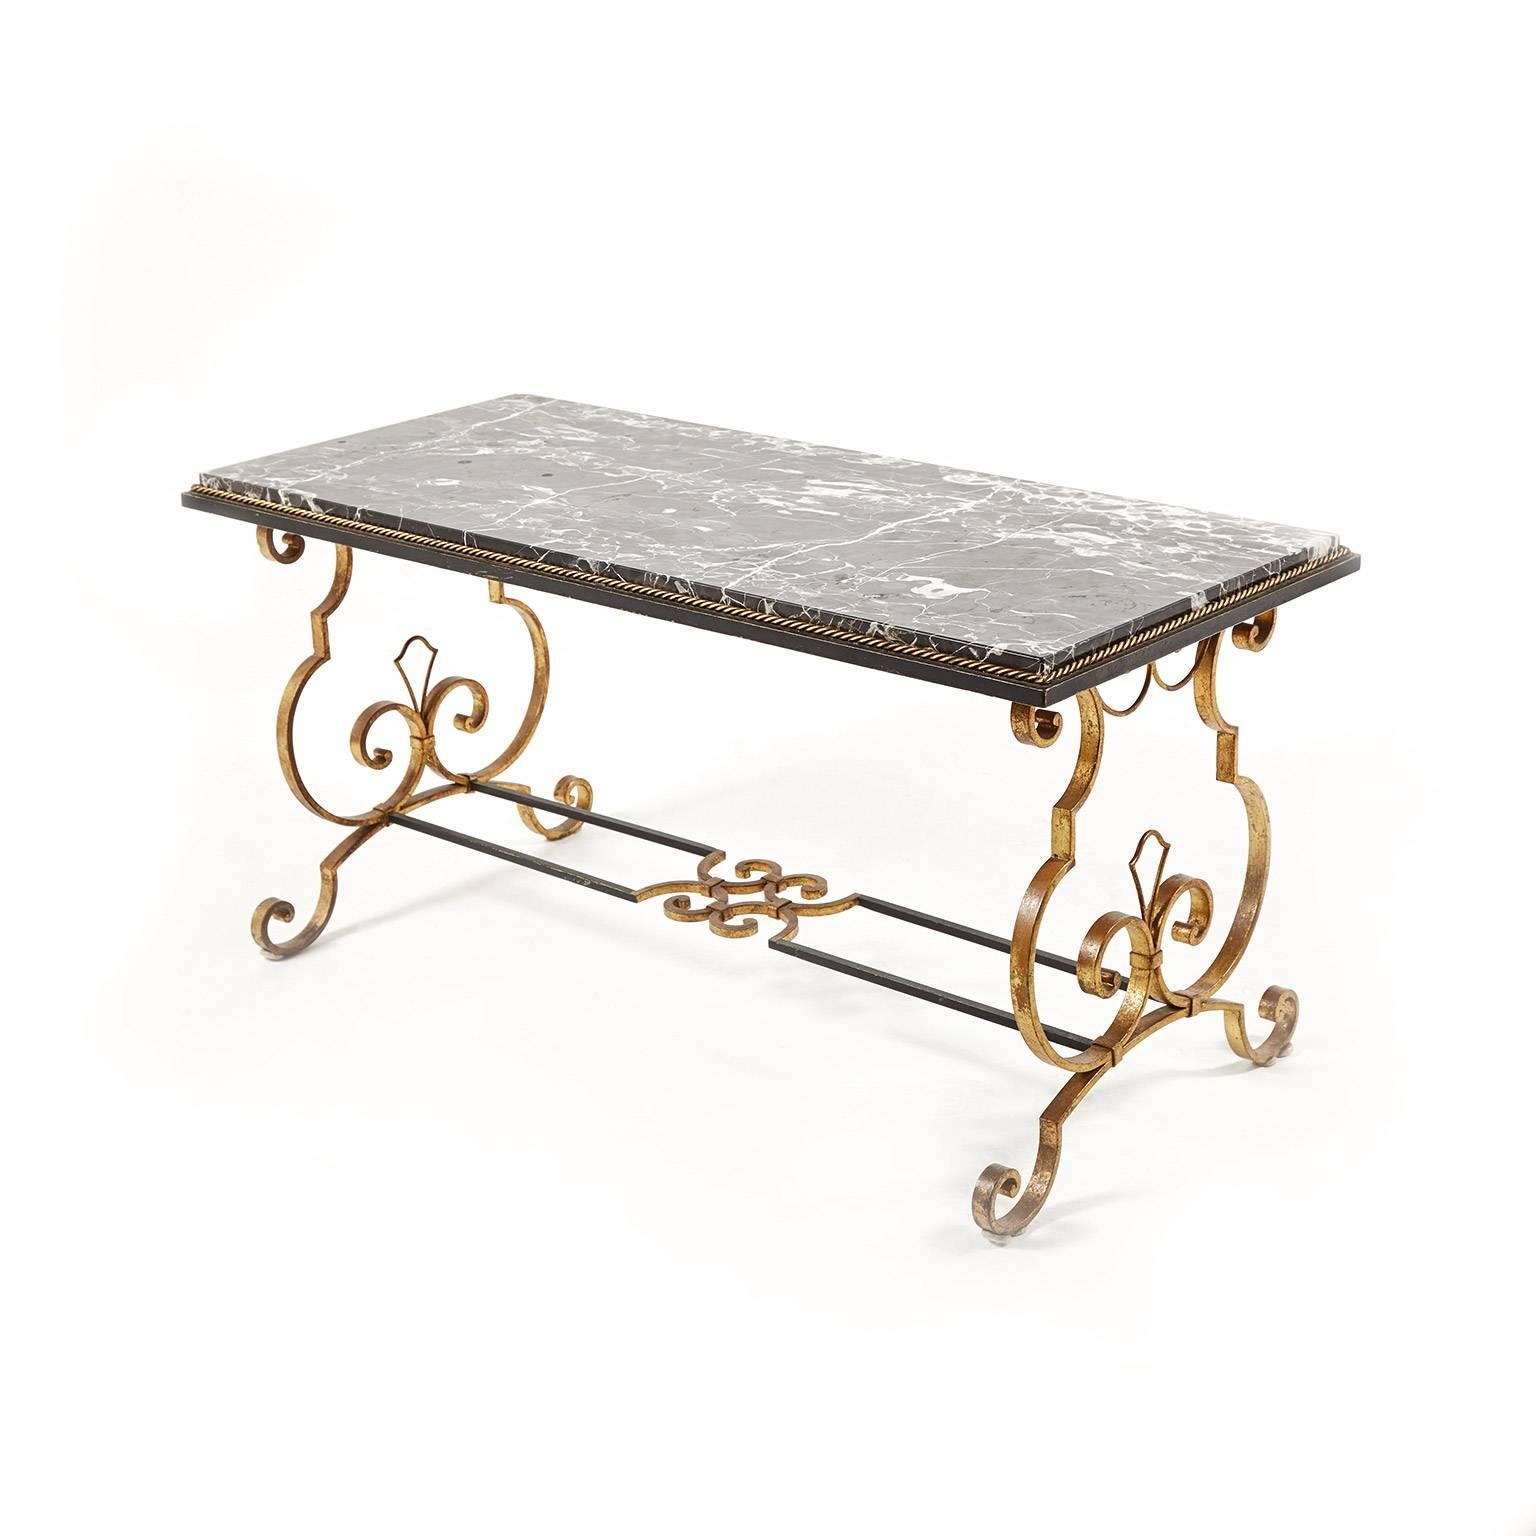 This beautiful Subes iron-and-bronze coffee table has fine detailing (note the fleur-de-lys) and unmistakable Subes Atelier scroll work, patina and detailing. From Paris, circa 1940. 


